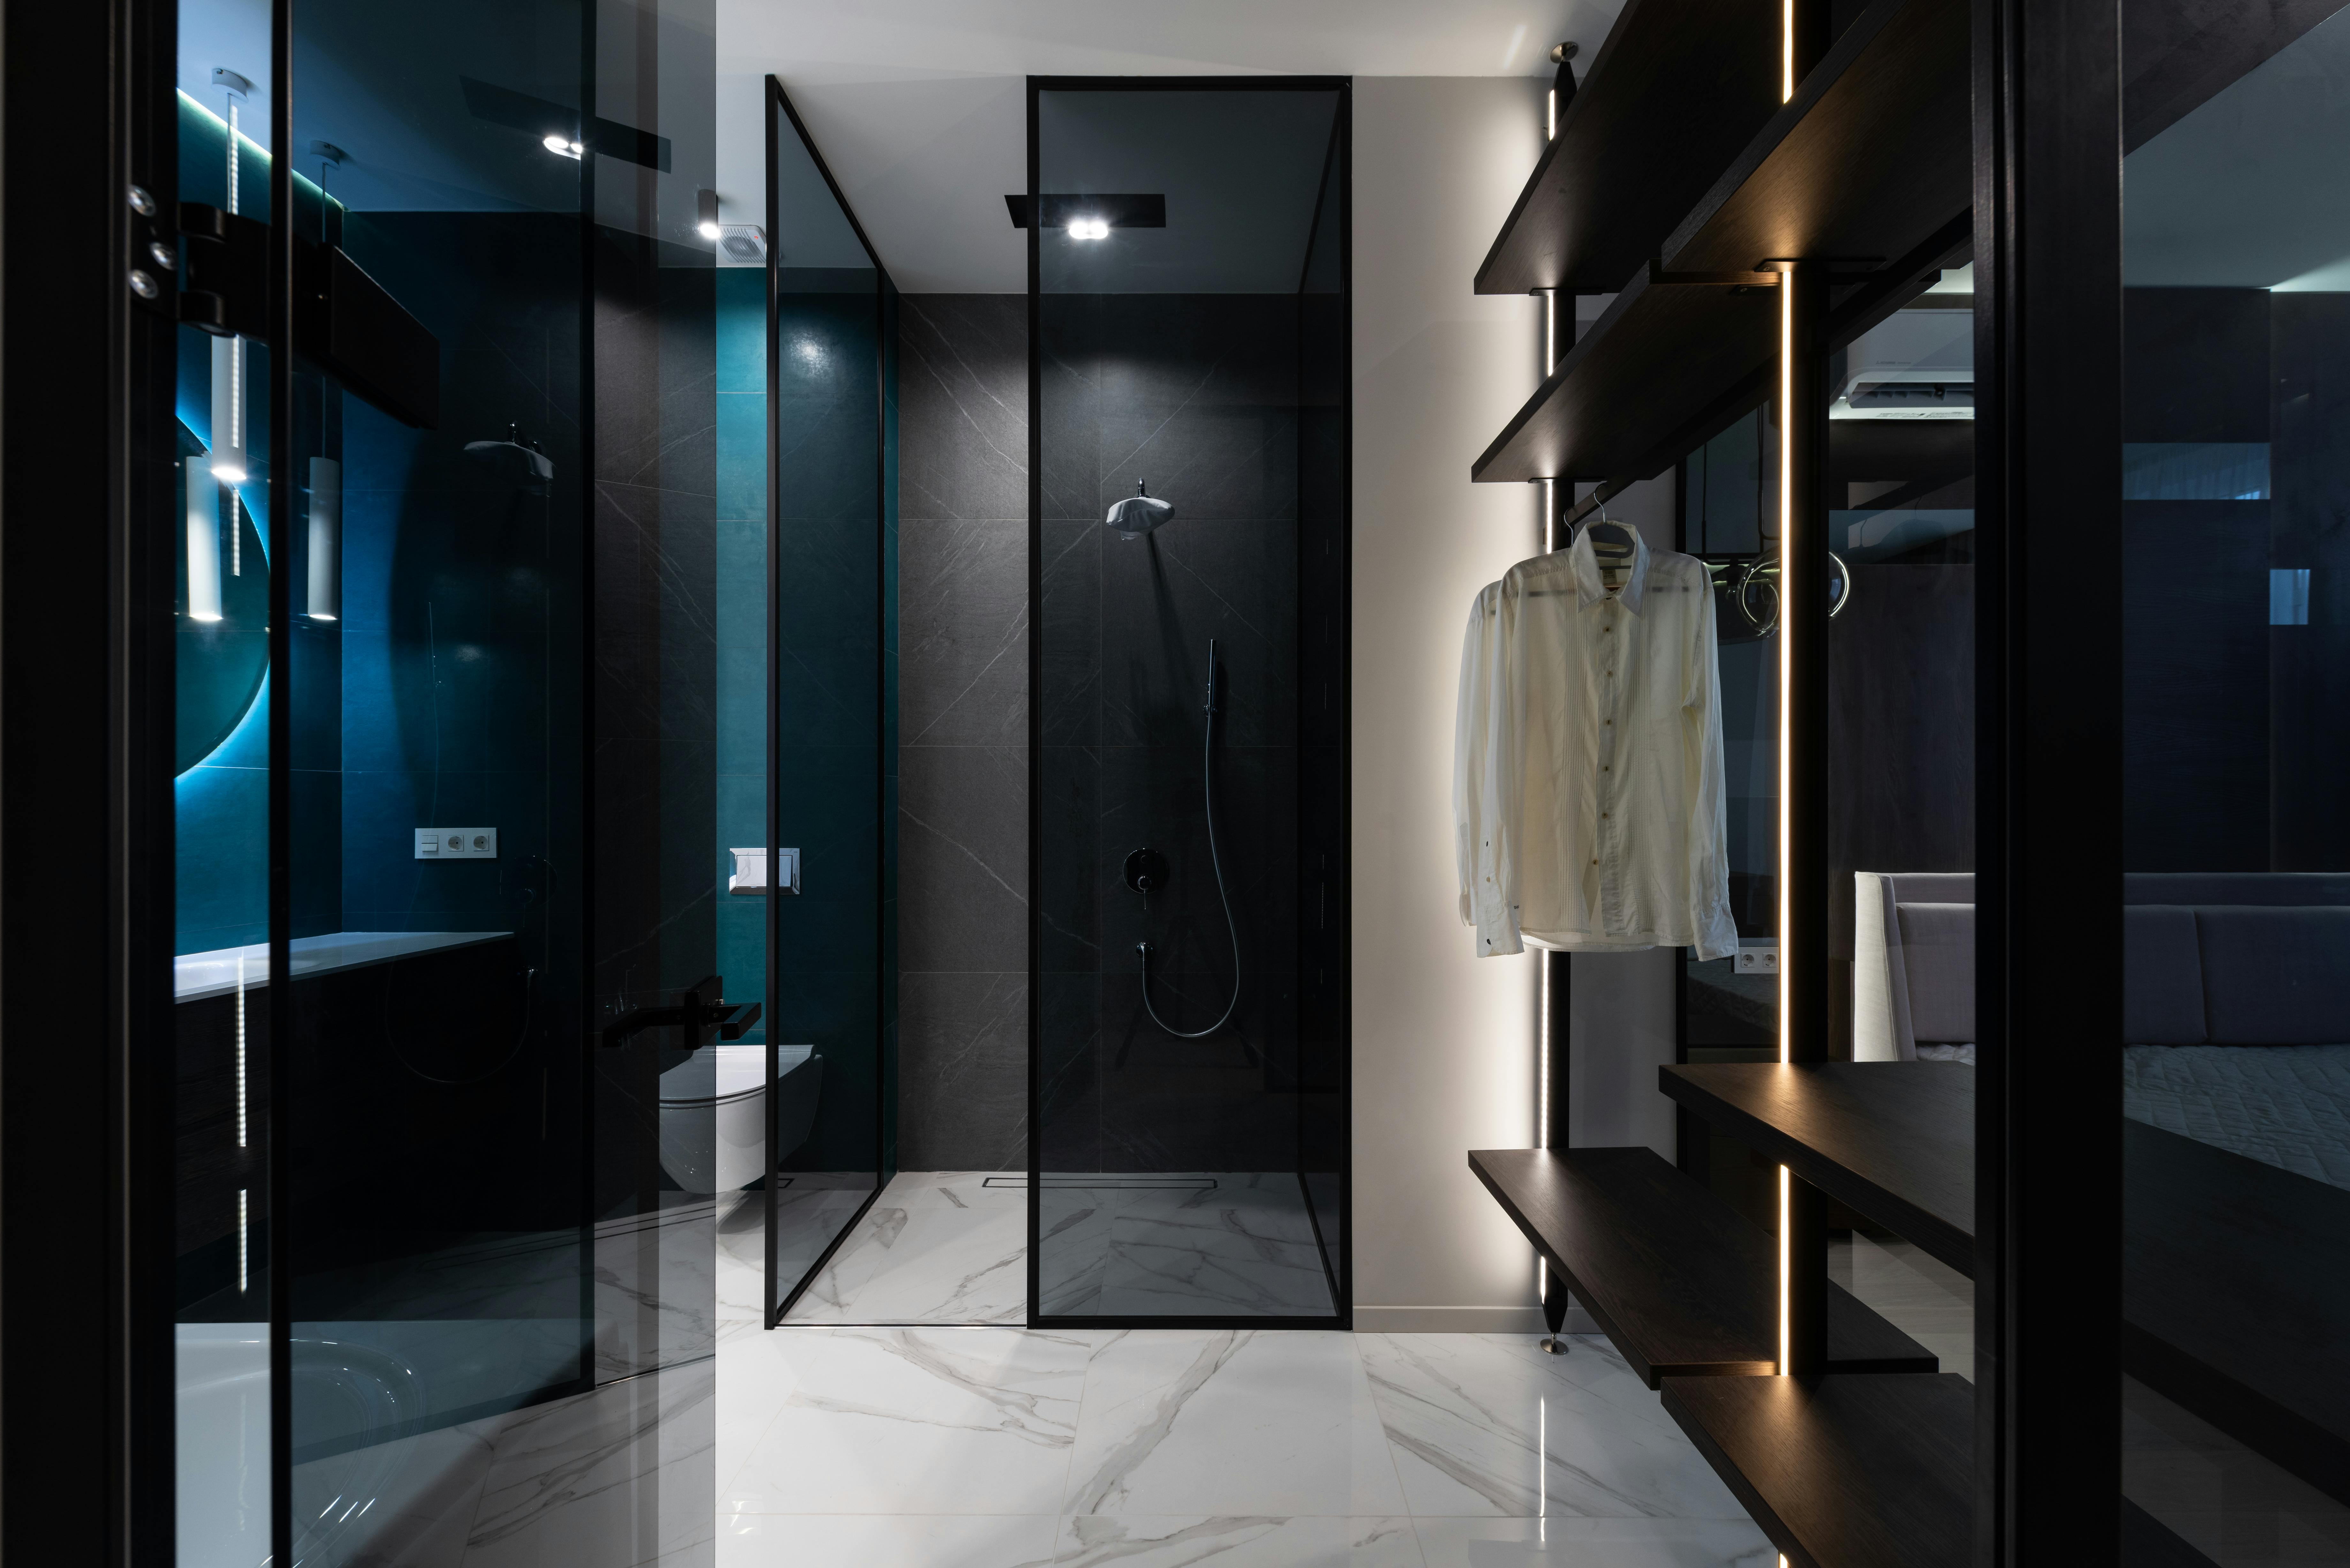 wardrobe and bathroom with glass walls in modern bedroom